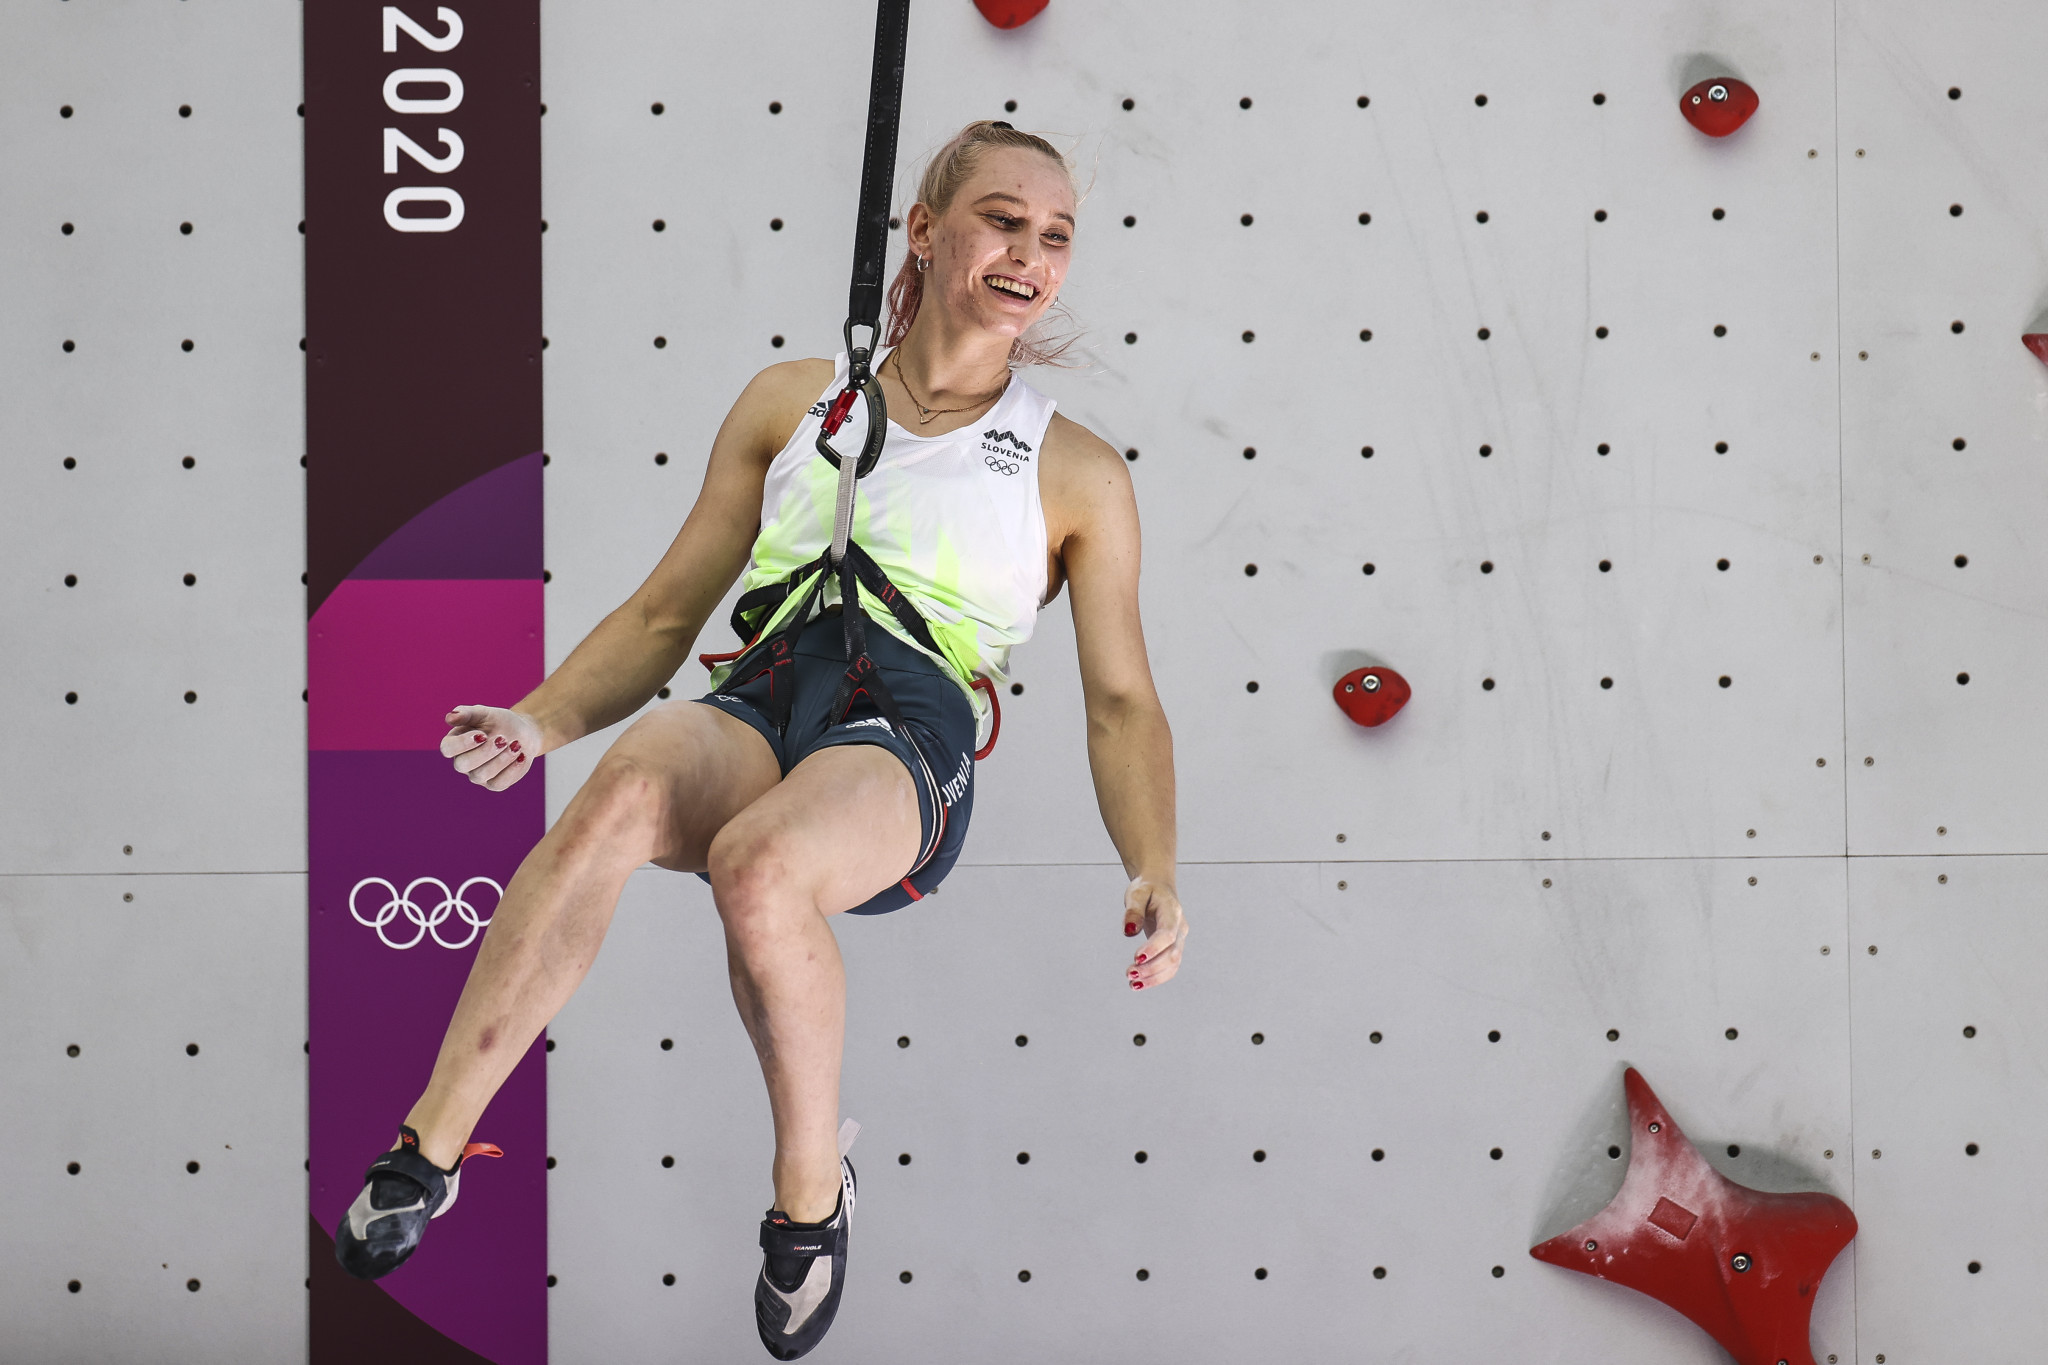 IFSC plans to celebrate first Olympic champions at Climbing Summit in Turin